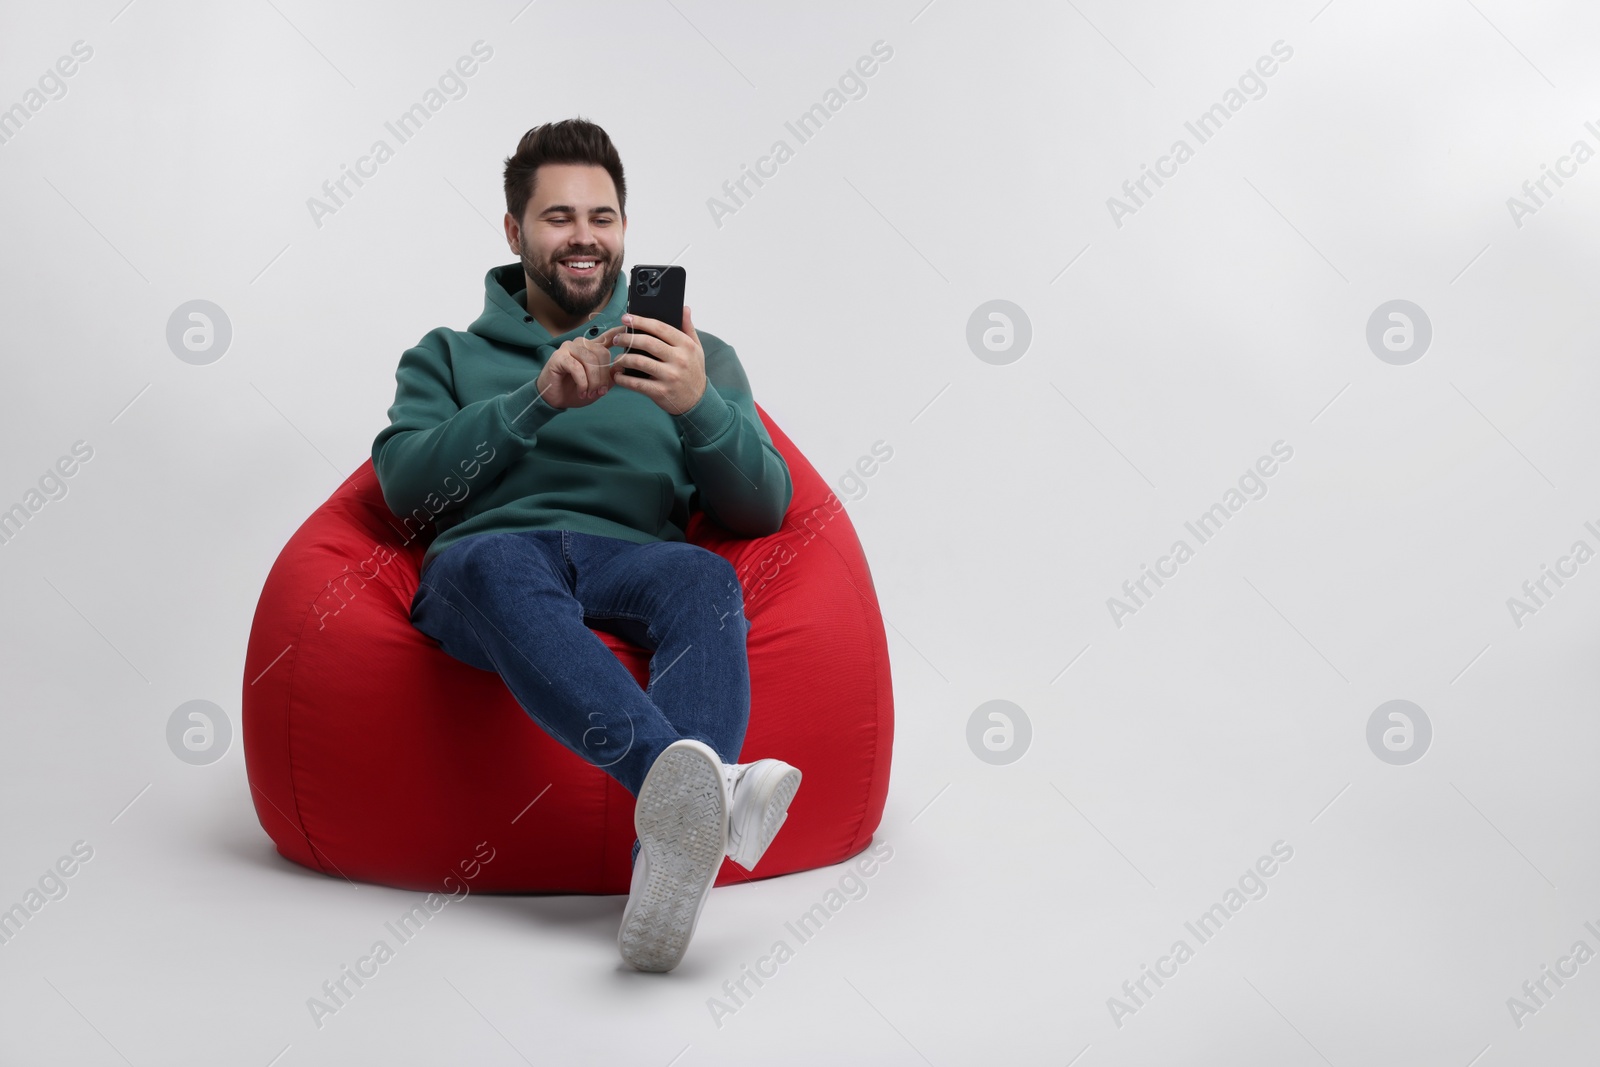 Photo of Happy young man using smartphone on bean bag chair against white background, space for text